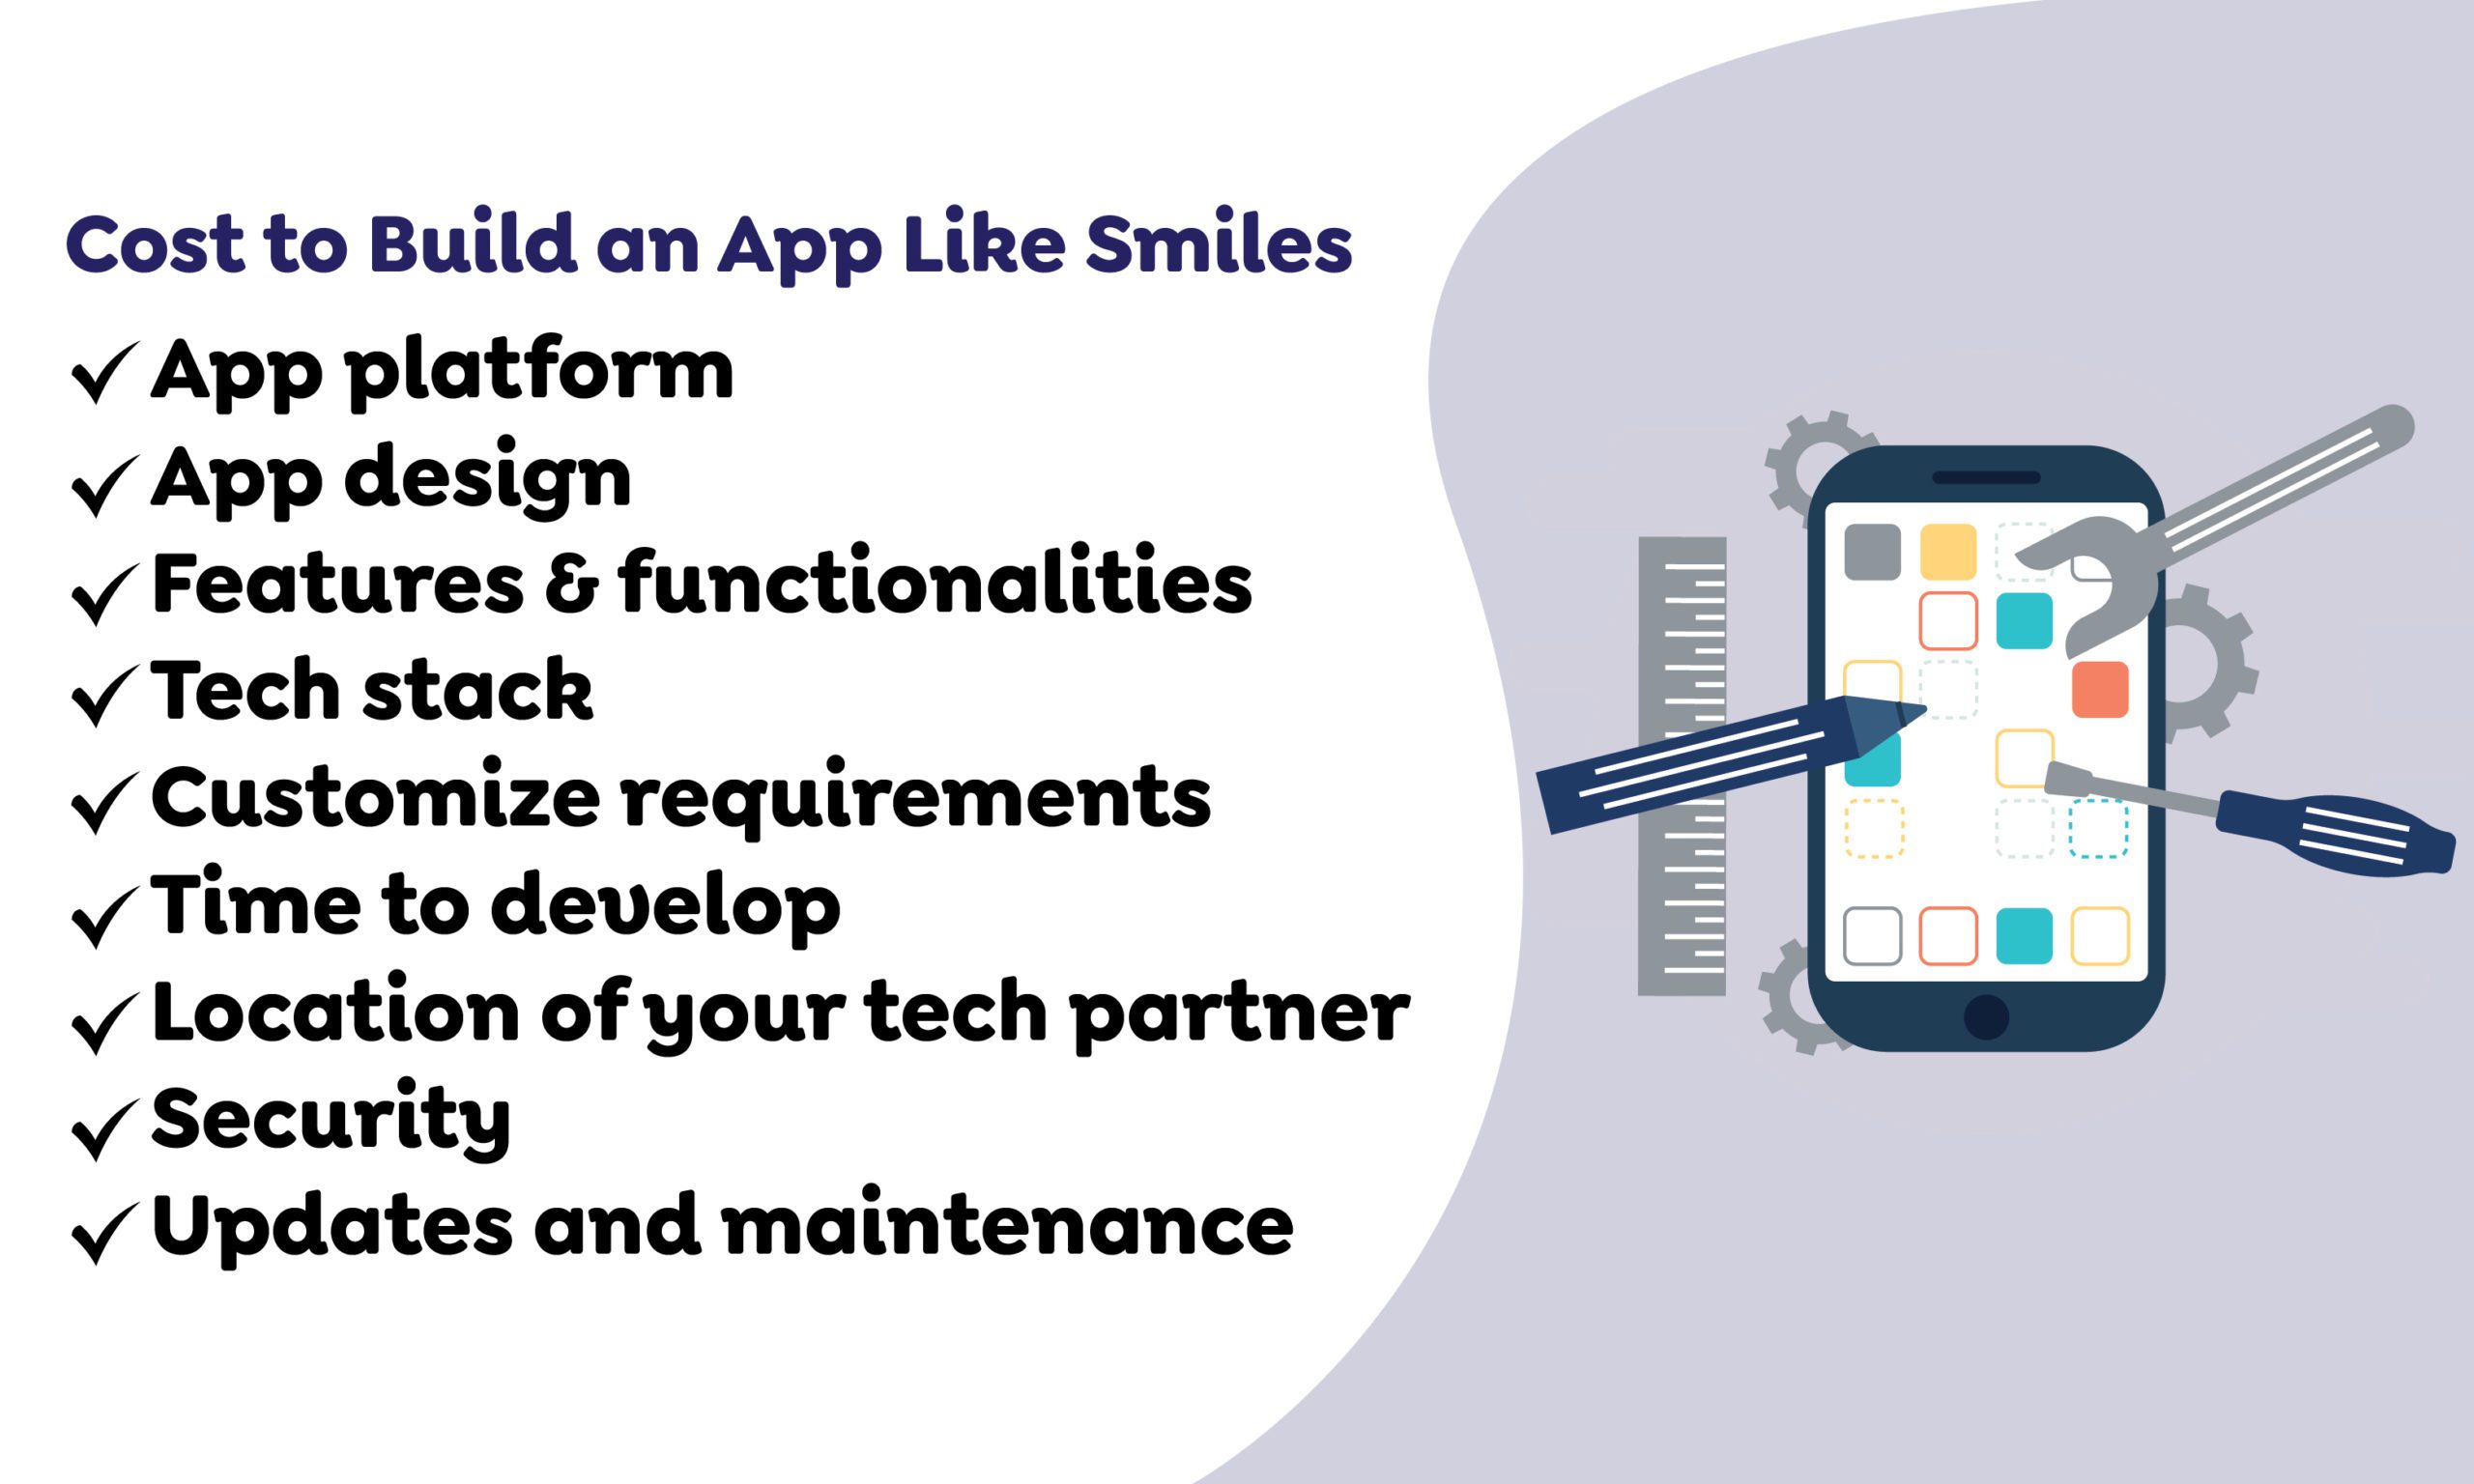 How Much Does it Cost to Build an App Like Smiles